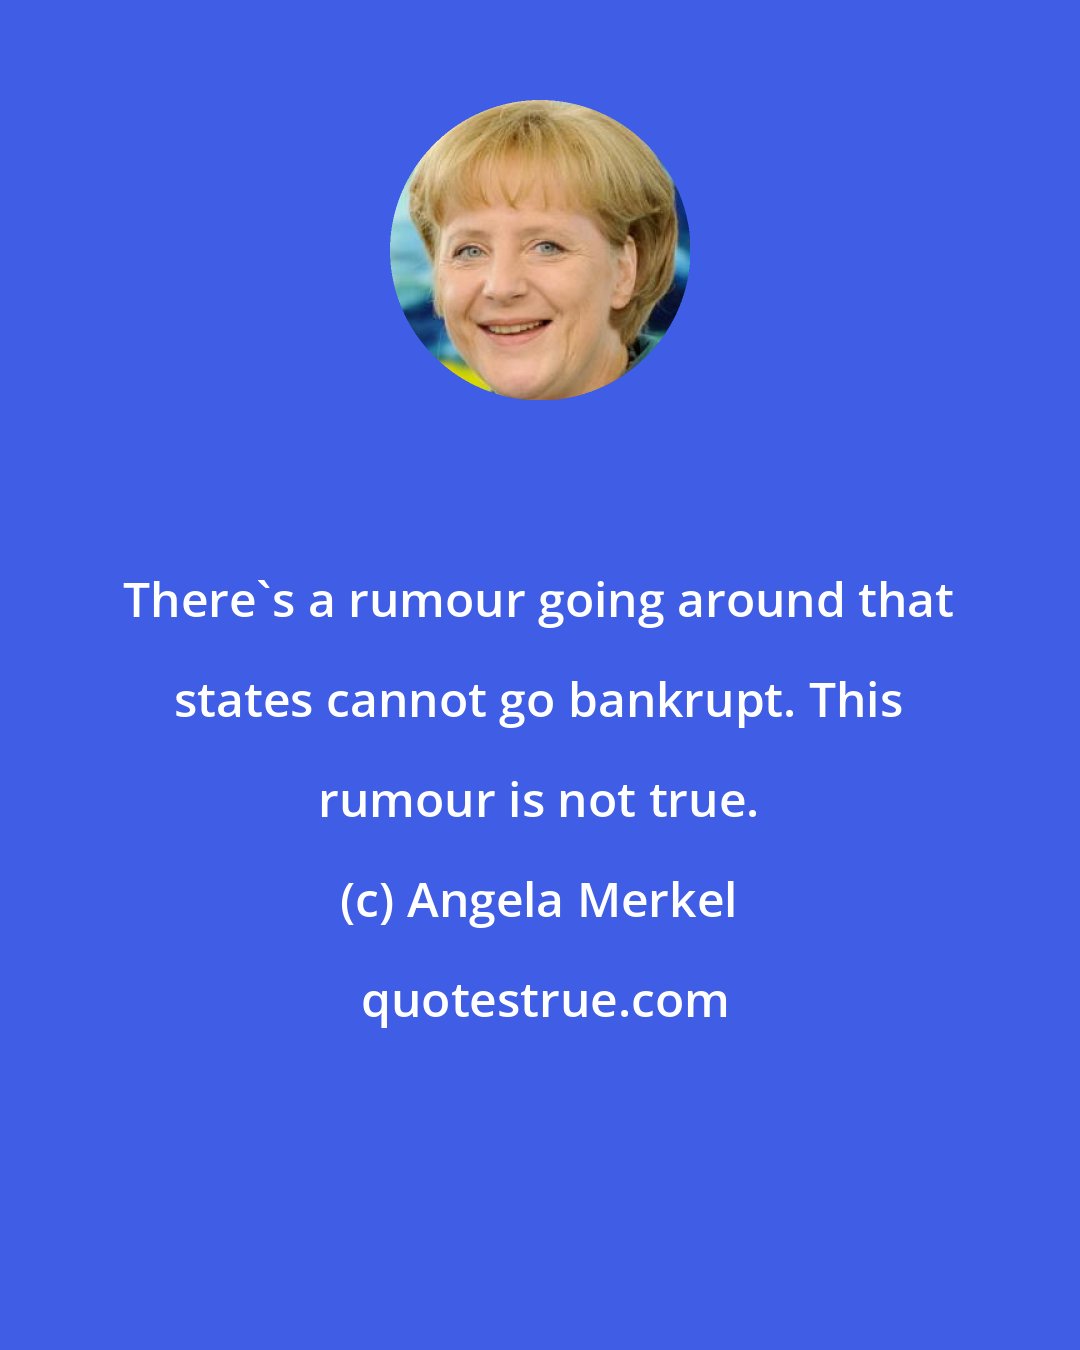 Angela Merkel: There's a rumour going around that states cannot go bankrupt. This rumour is not true.